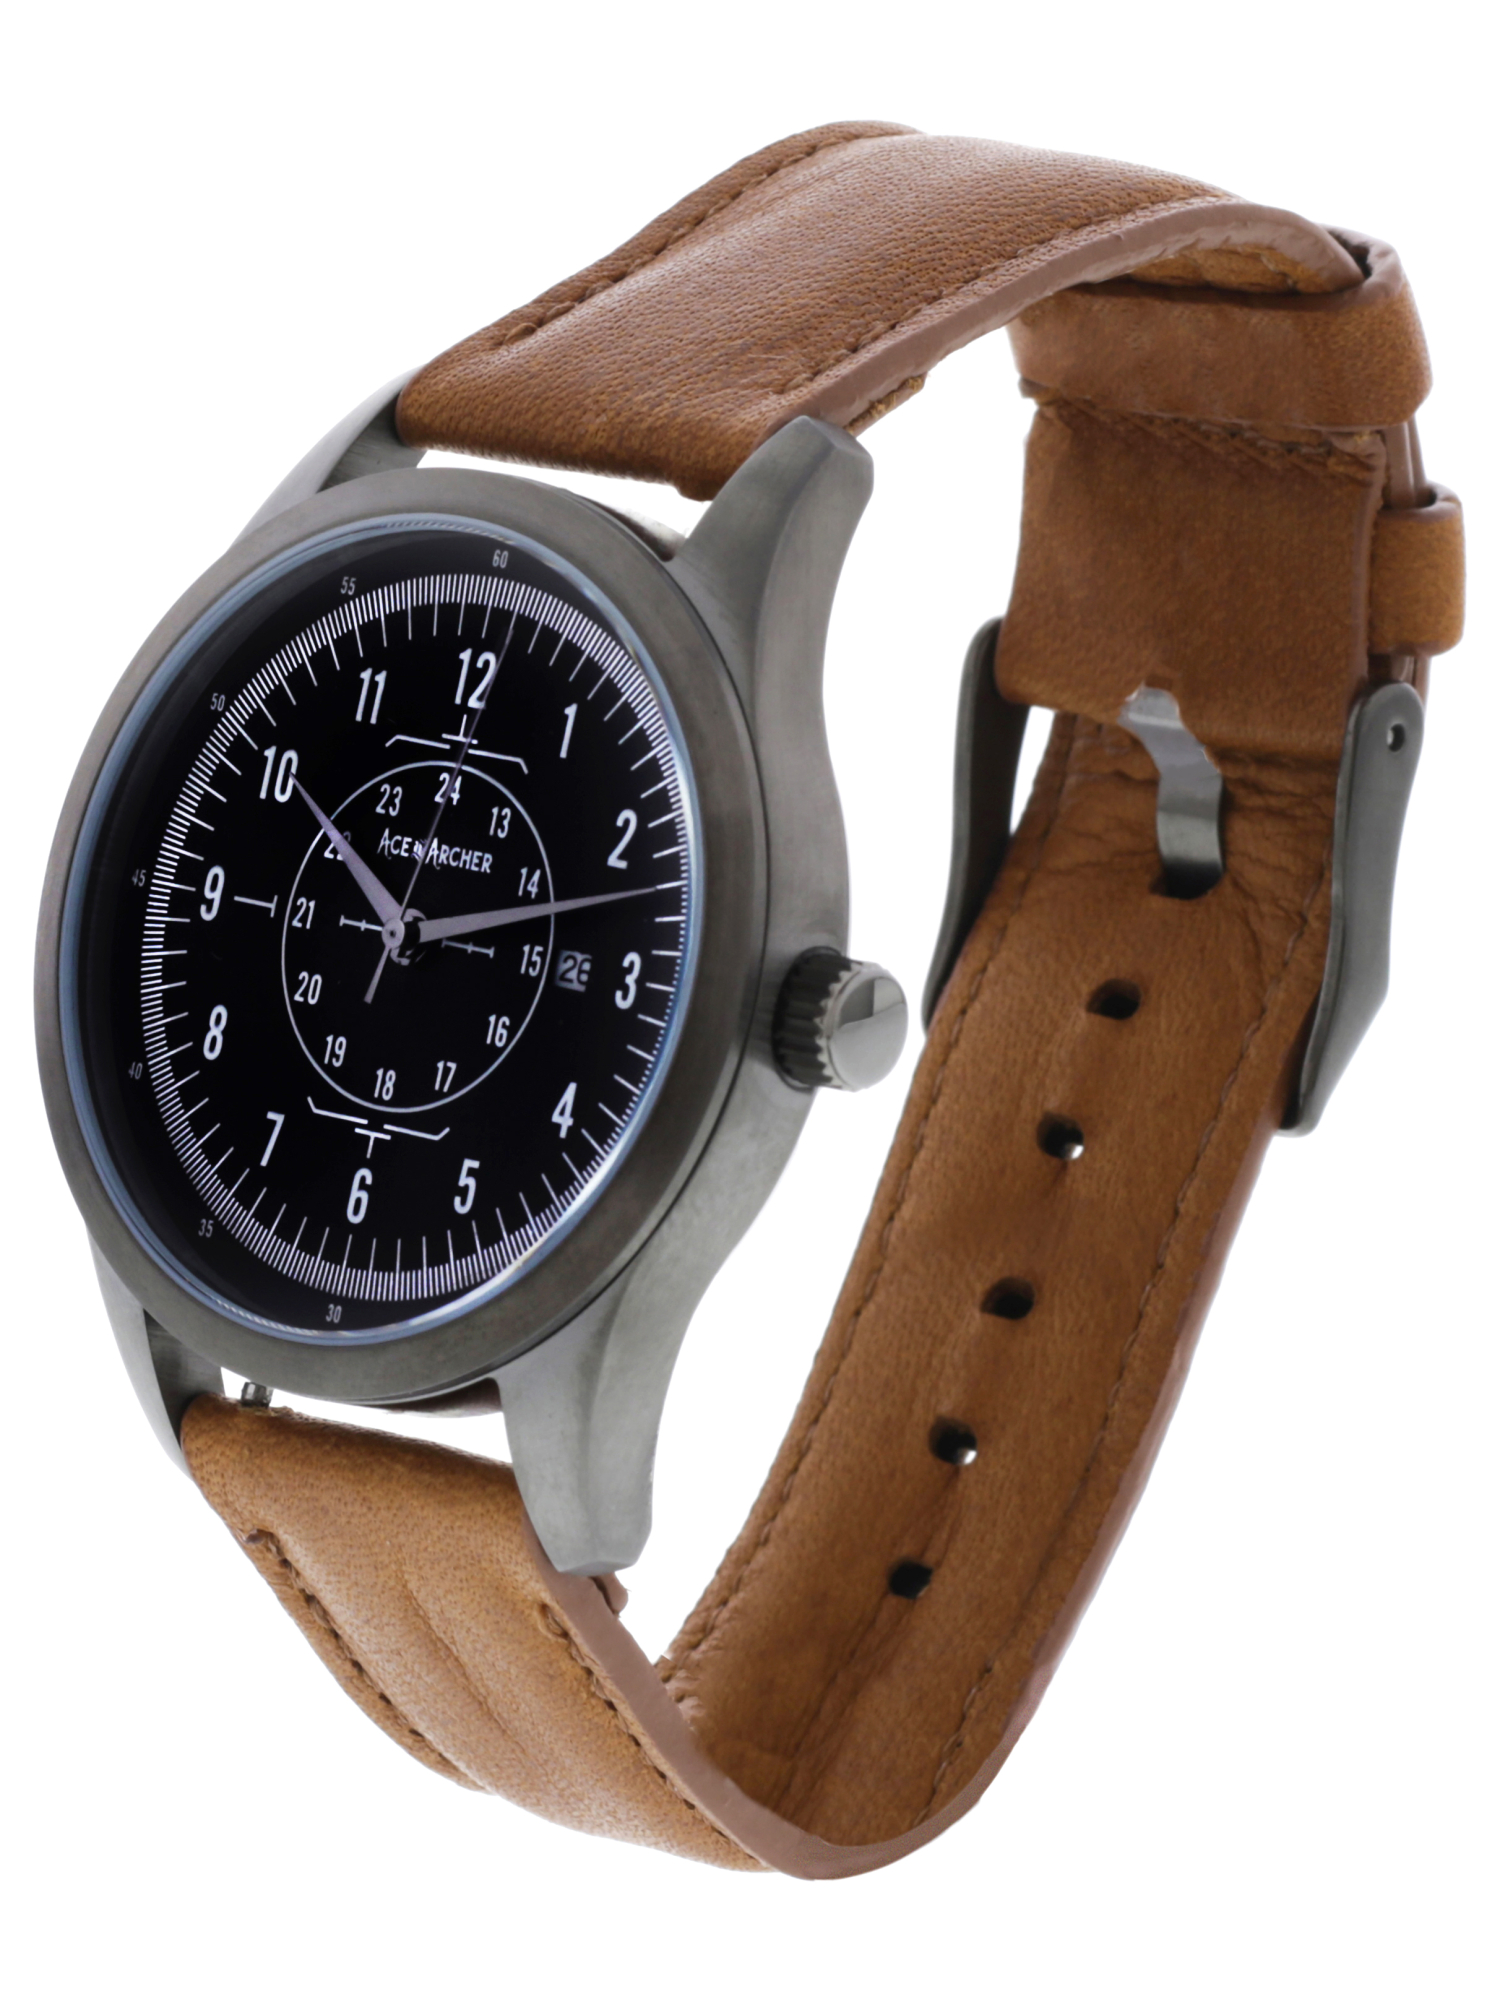 Aviator Watch, Stainless Steel Case and Leather Band for Men – Free Leather  W | eBay